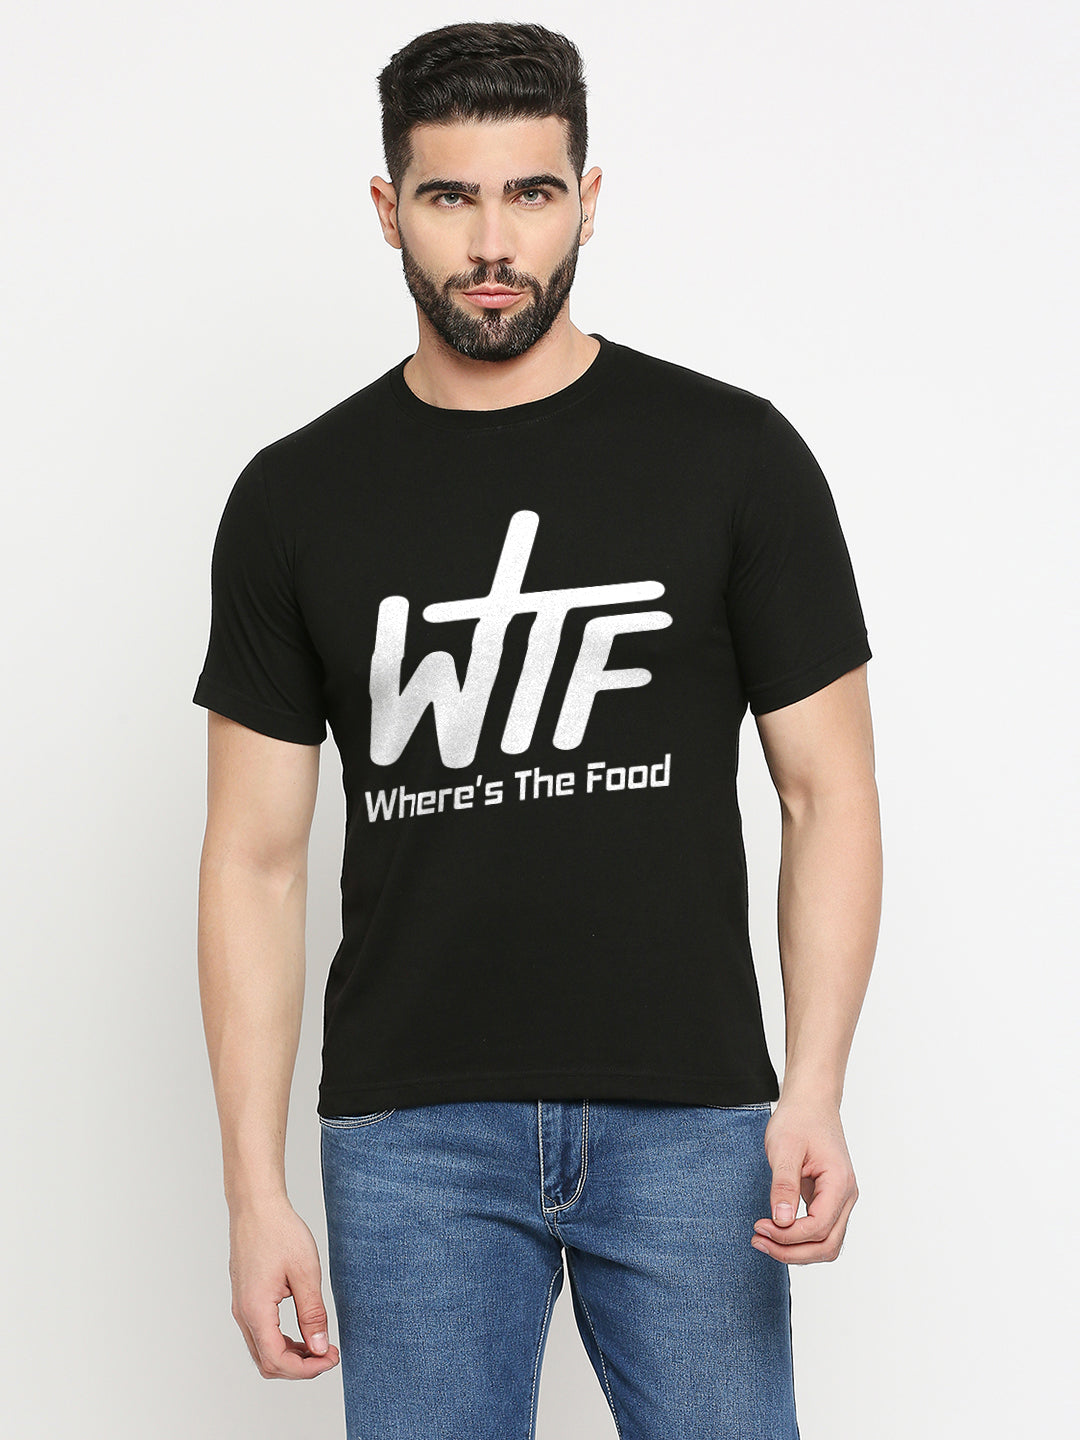 WTF Where's The Food T-Shirt